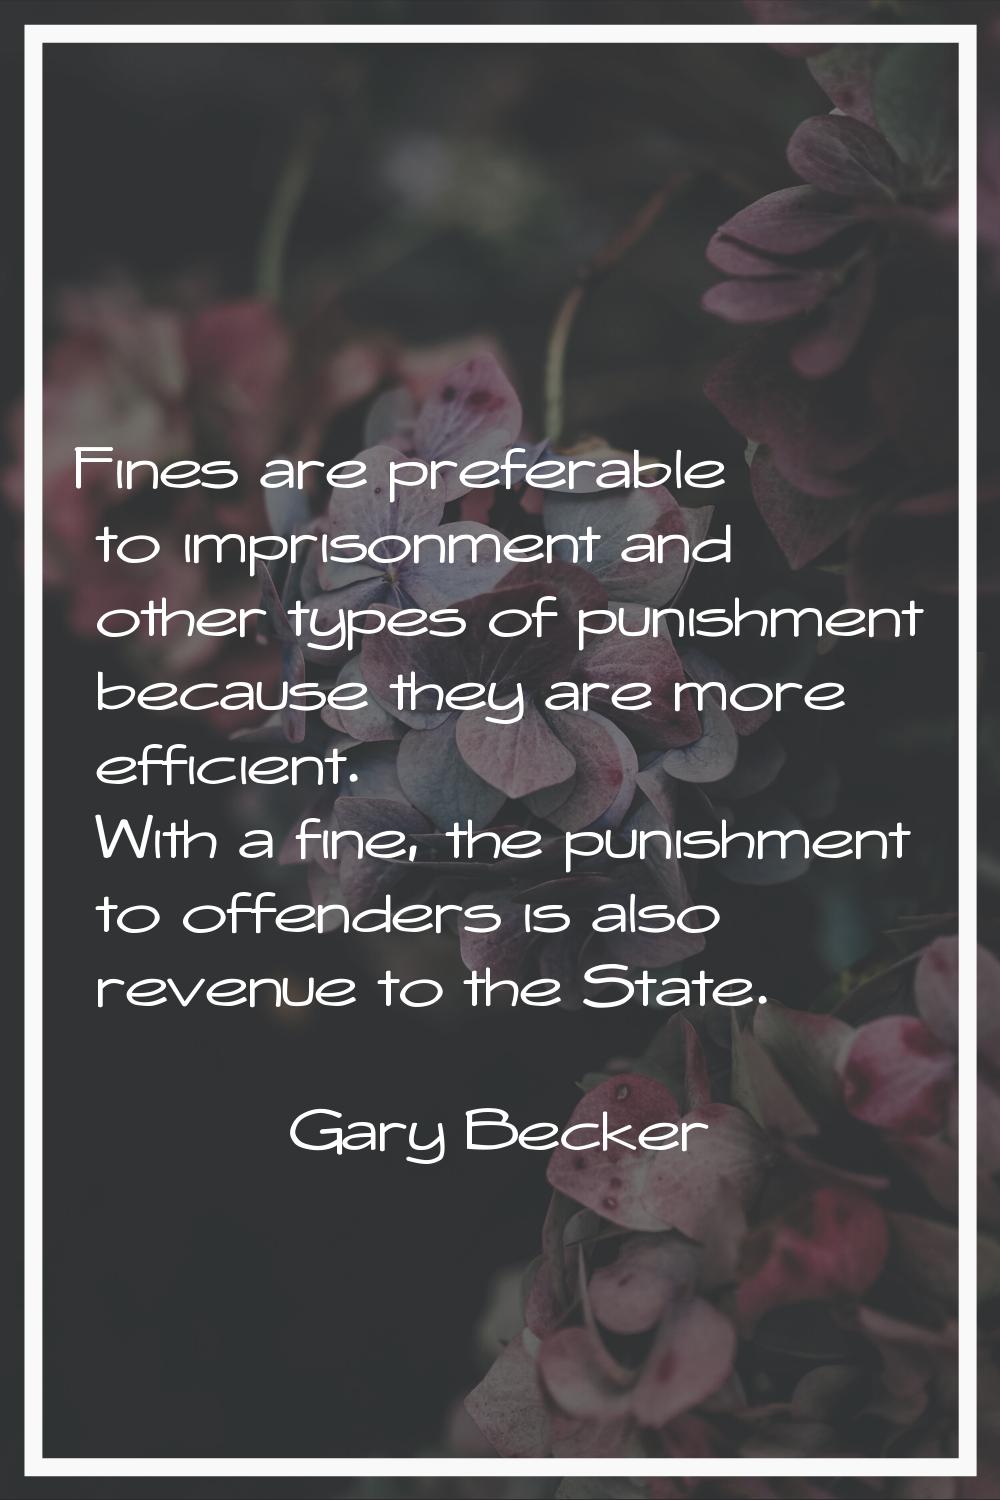 Fines are preferable to imprisonment and other types of punishment because they are more efficient.